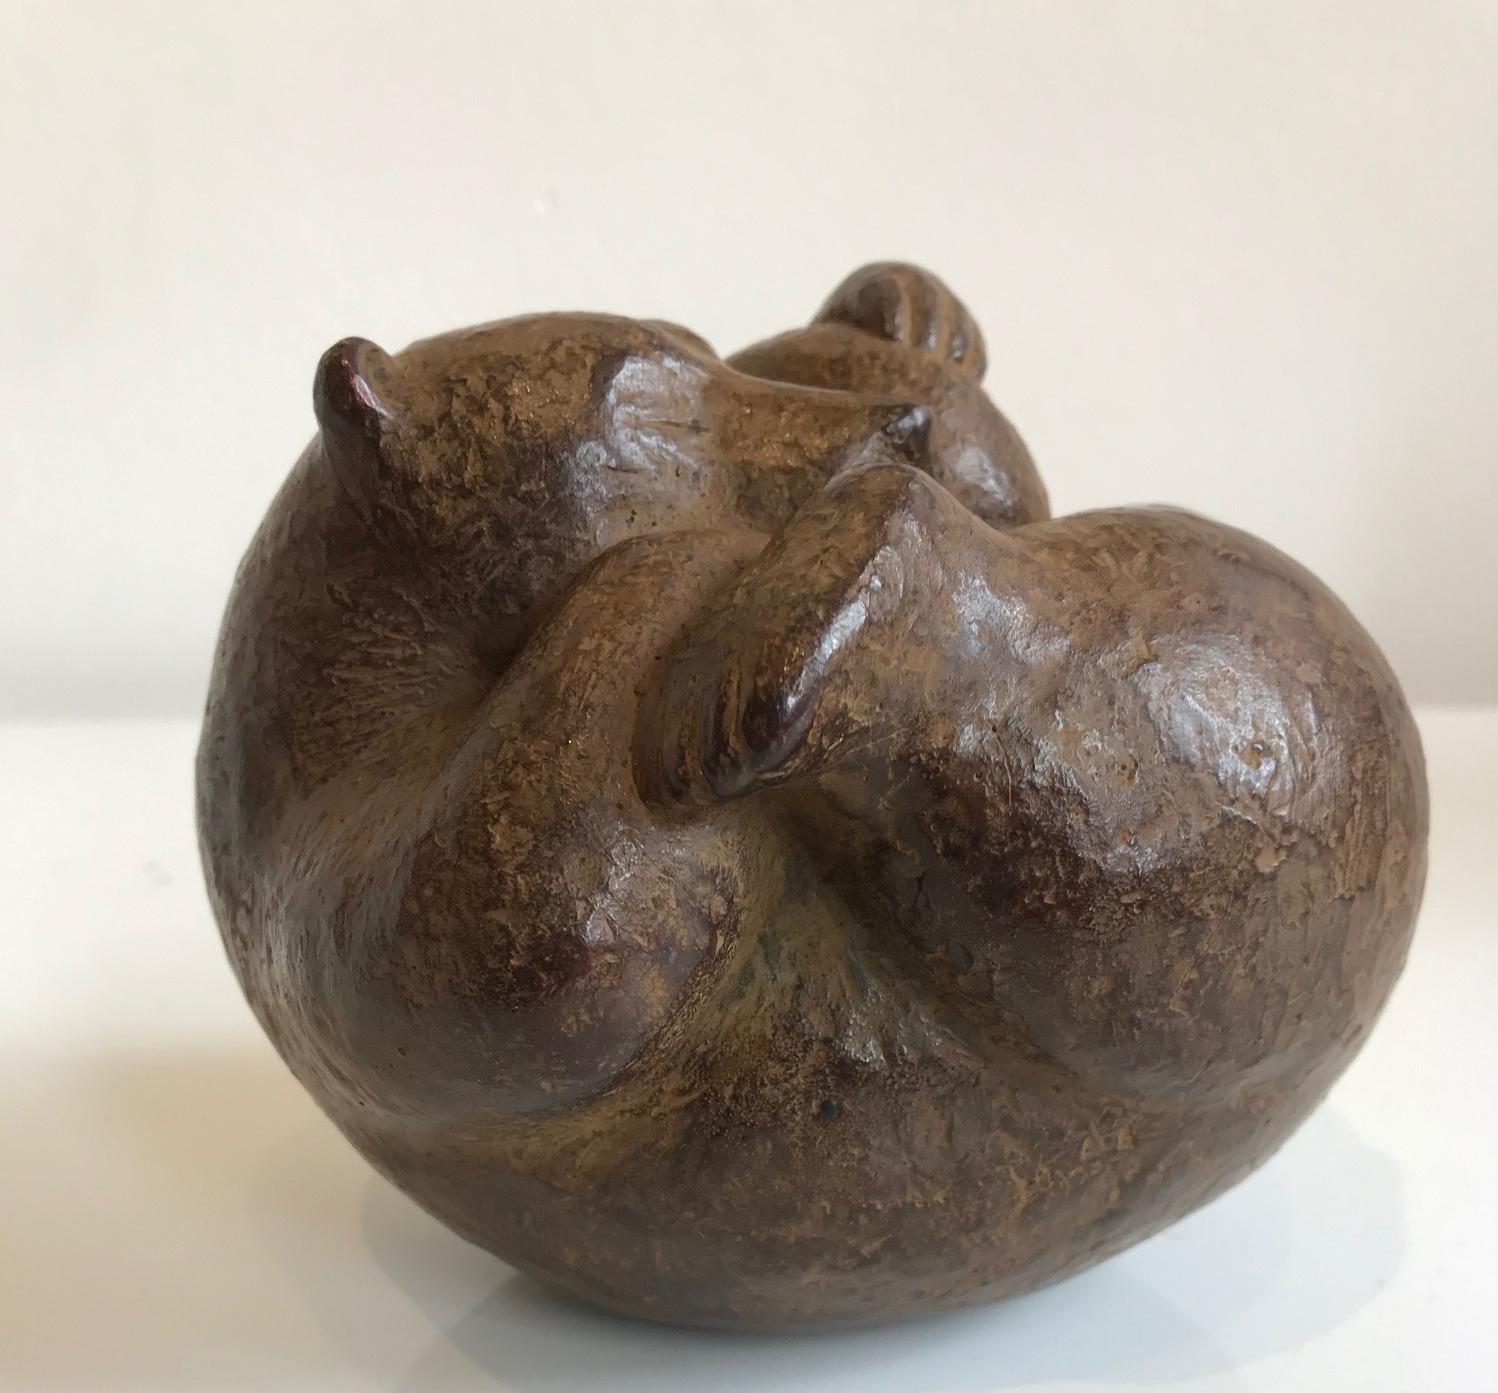 Karin Beek's (1948) bronze sculptures are characterized by a friendly, round and at the same time monumental style. They breathe the atmosphere of everyday life. Beek would like her sculptures to be accessible, touch the viewer and, also, invite